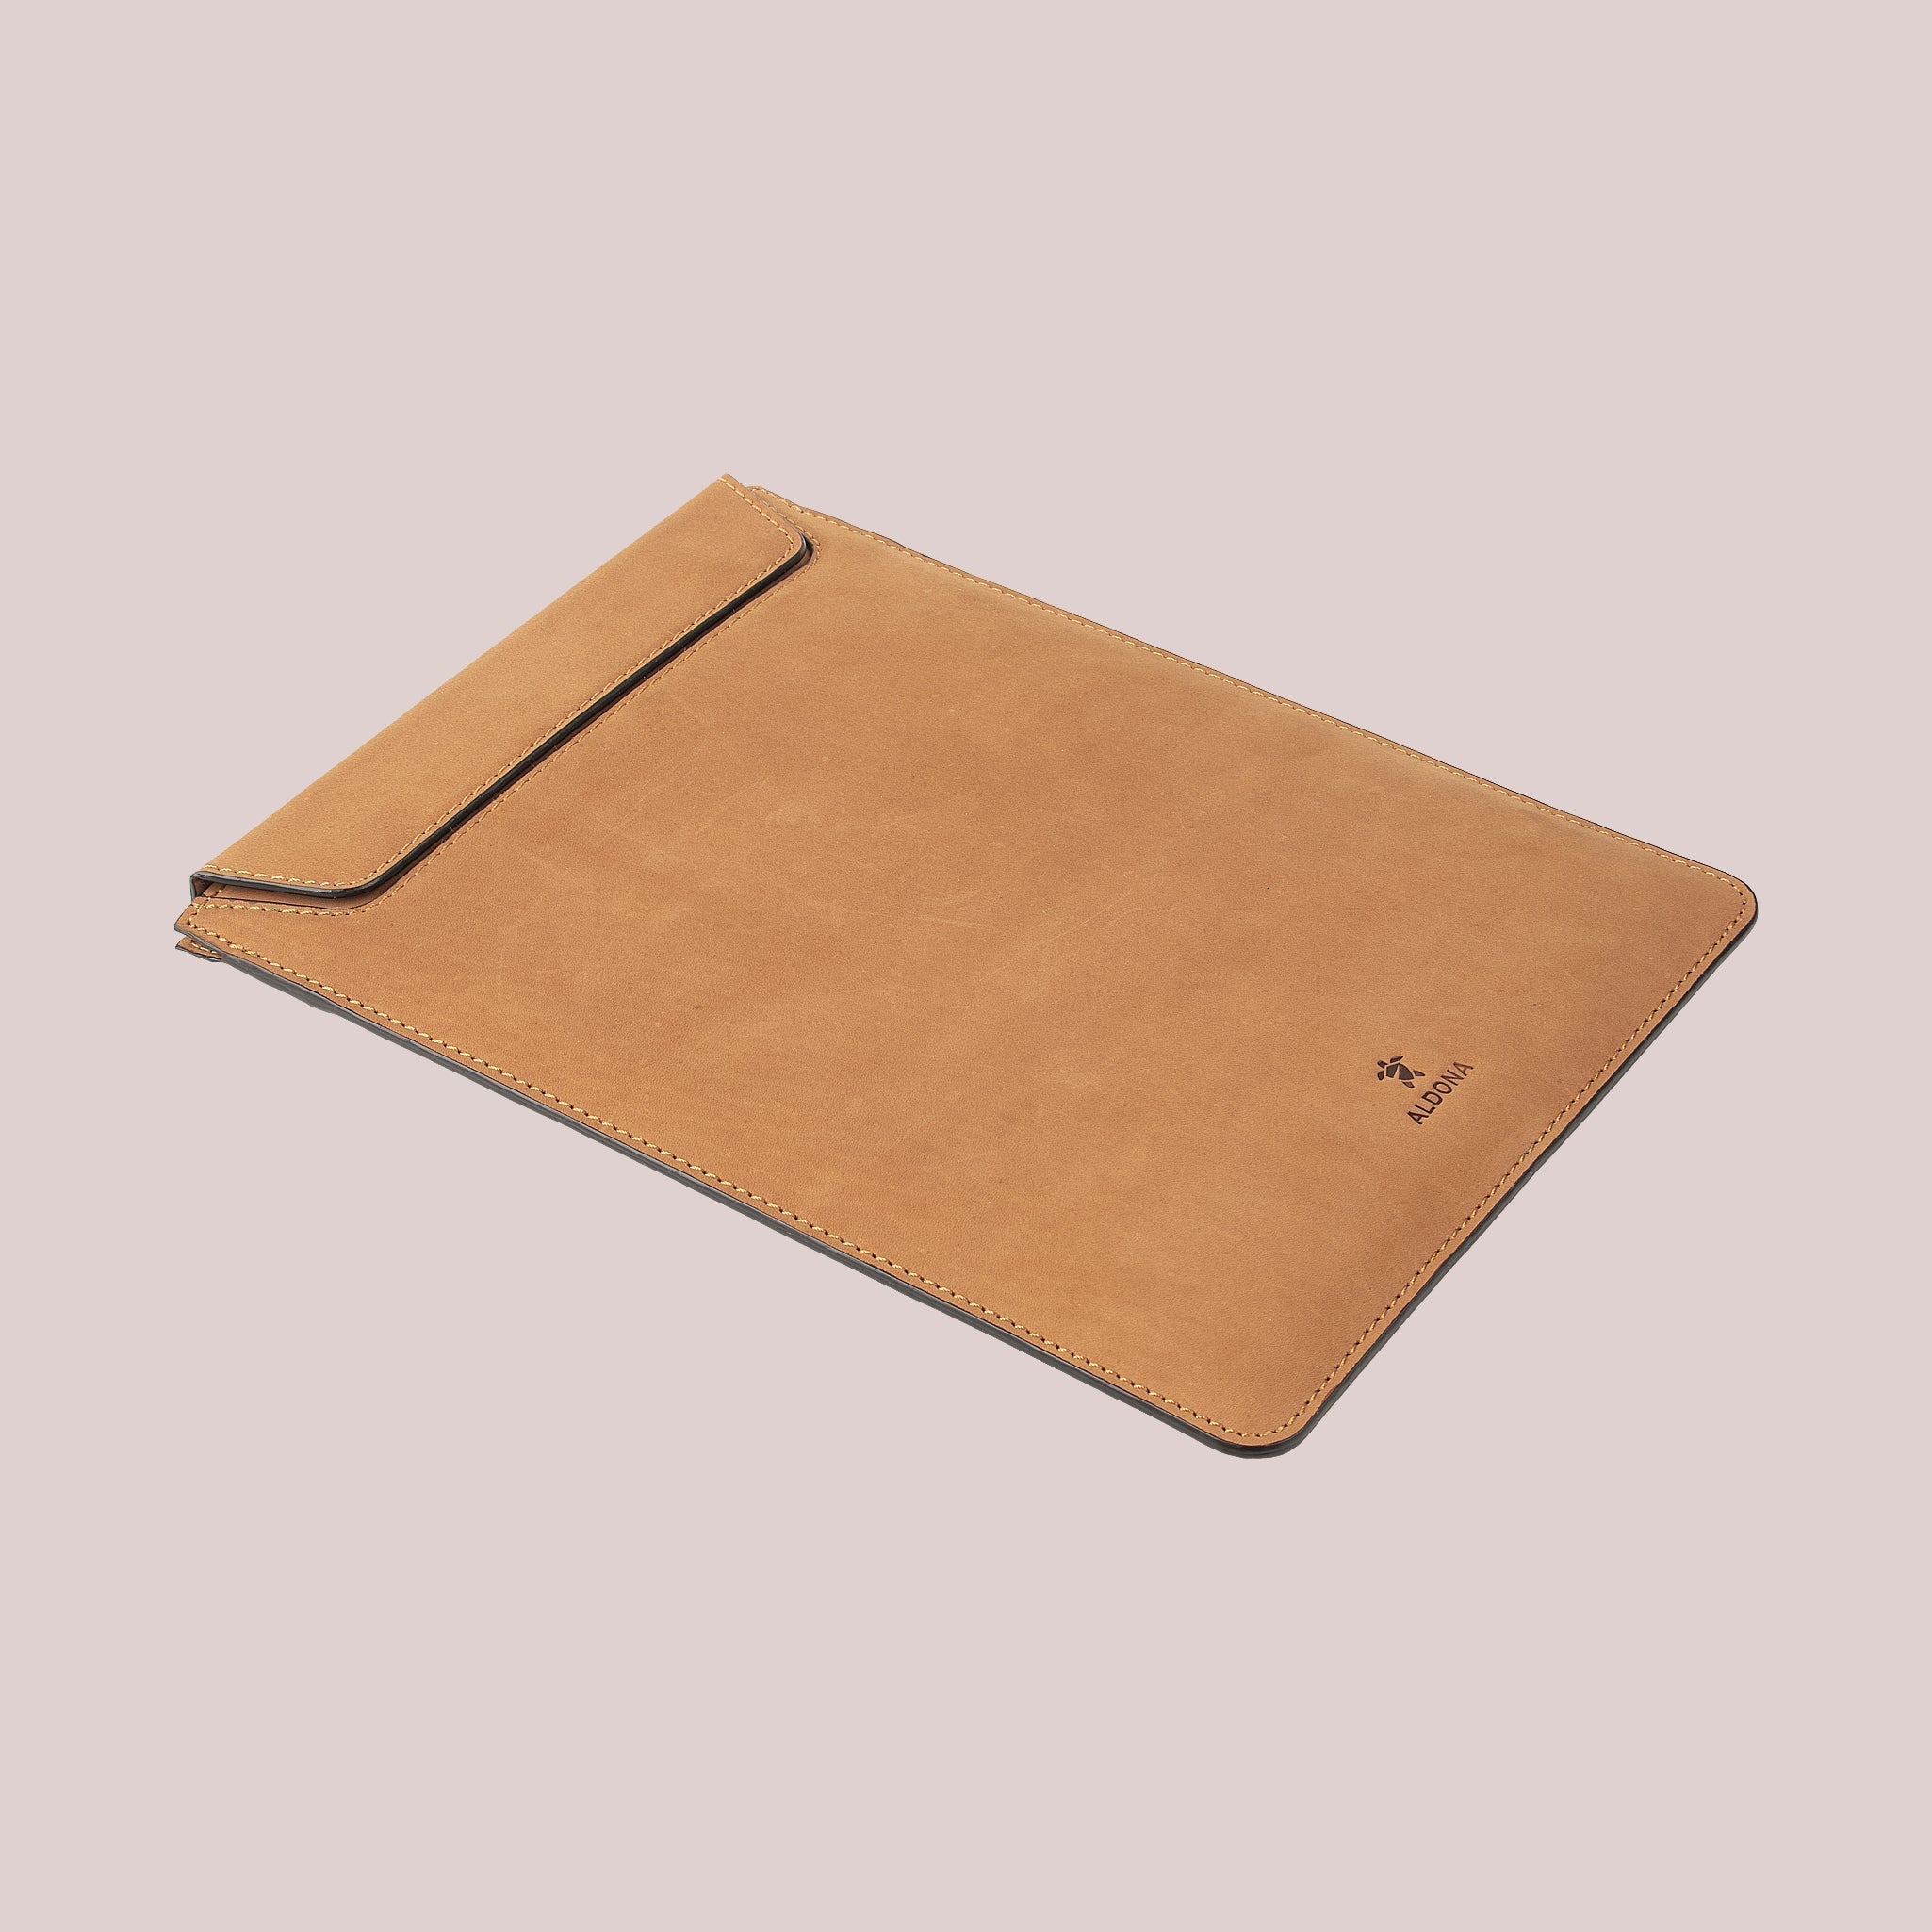 Protect your Macbook with a tan leather sleeve